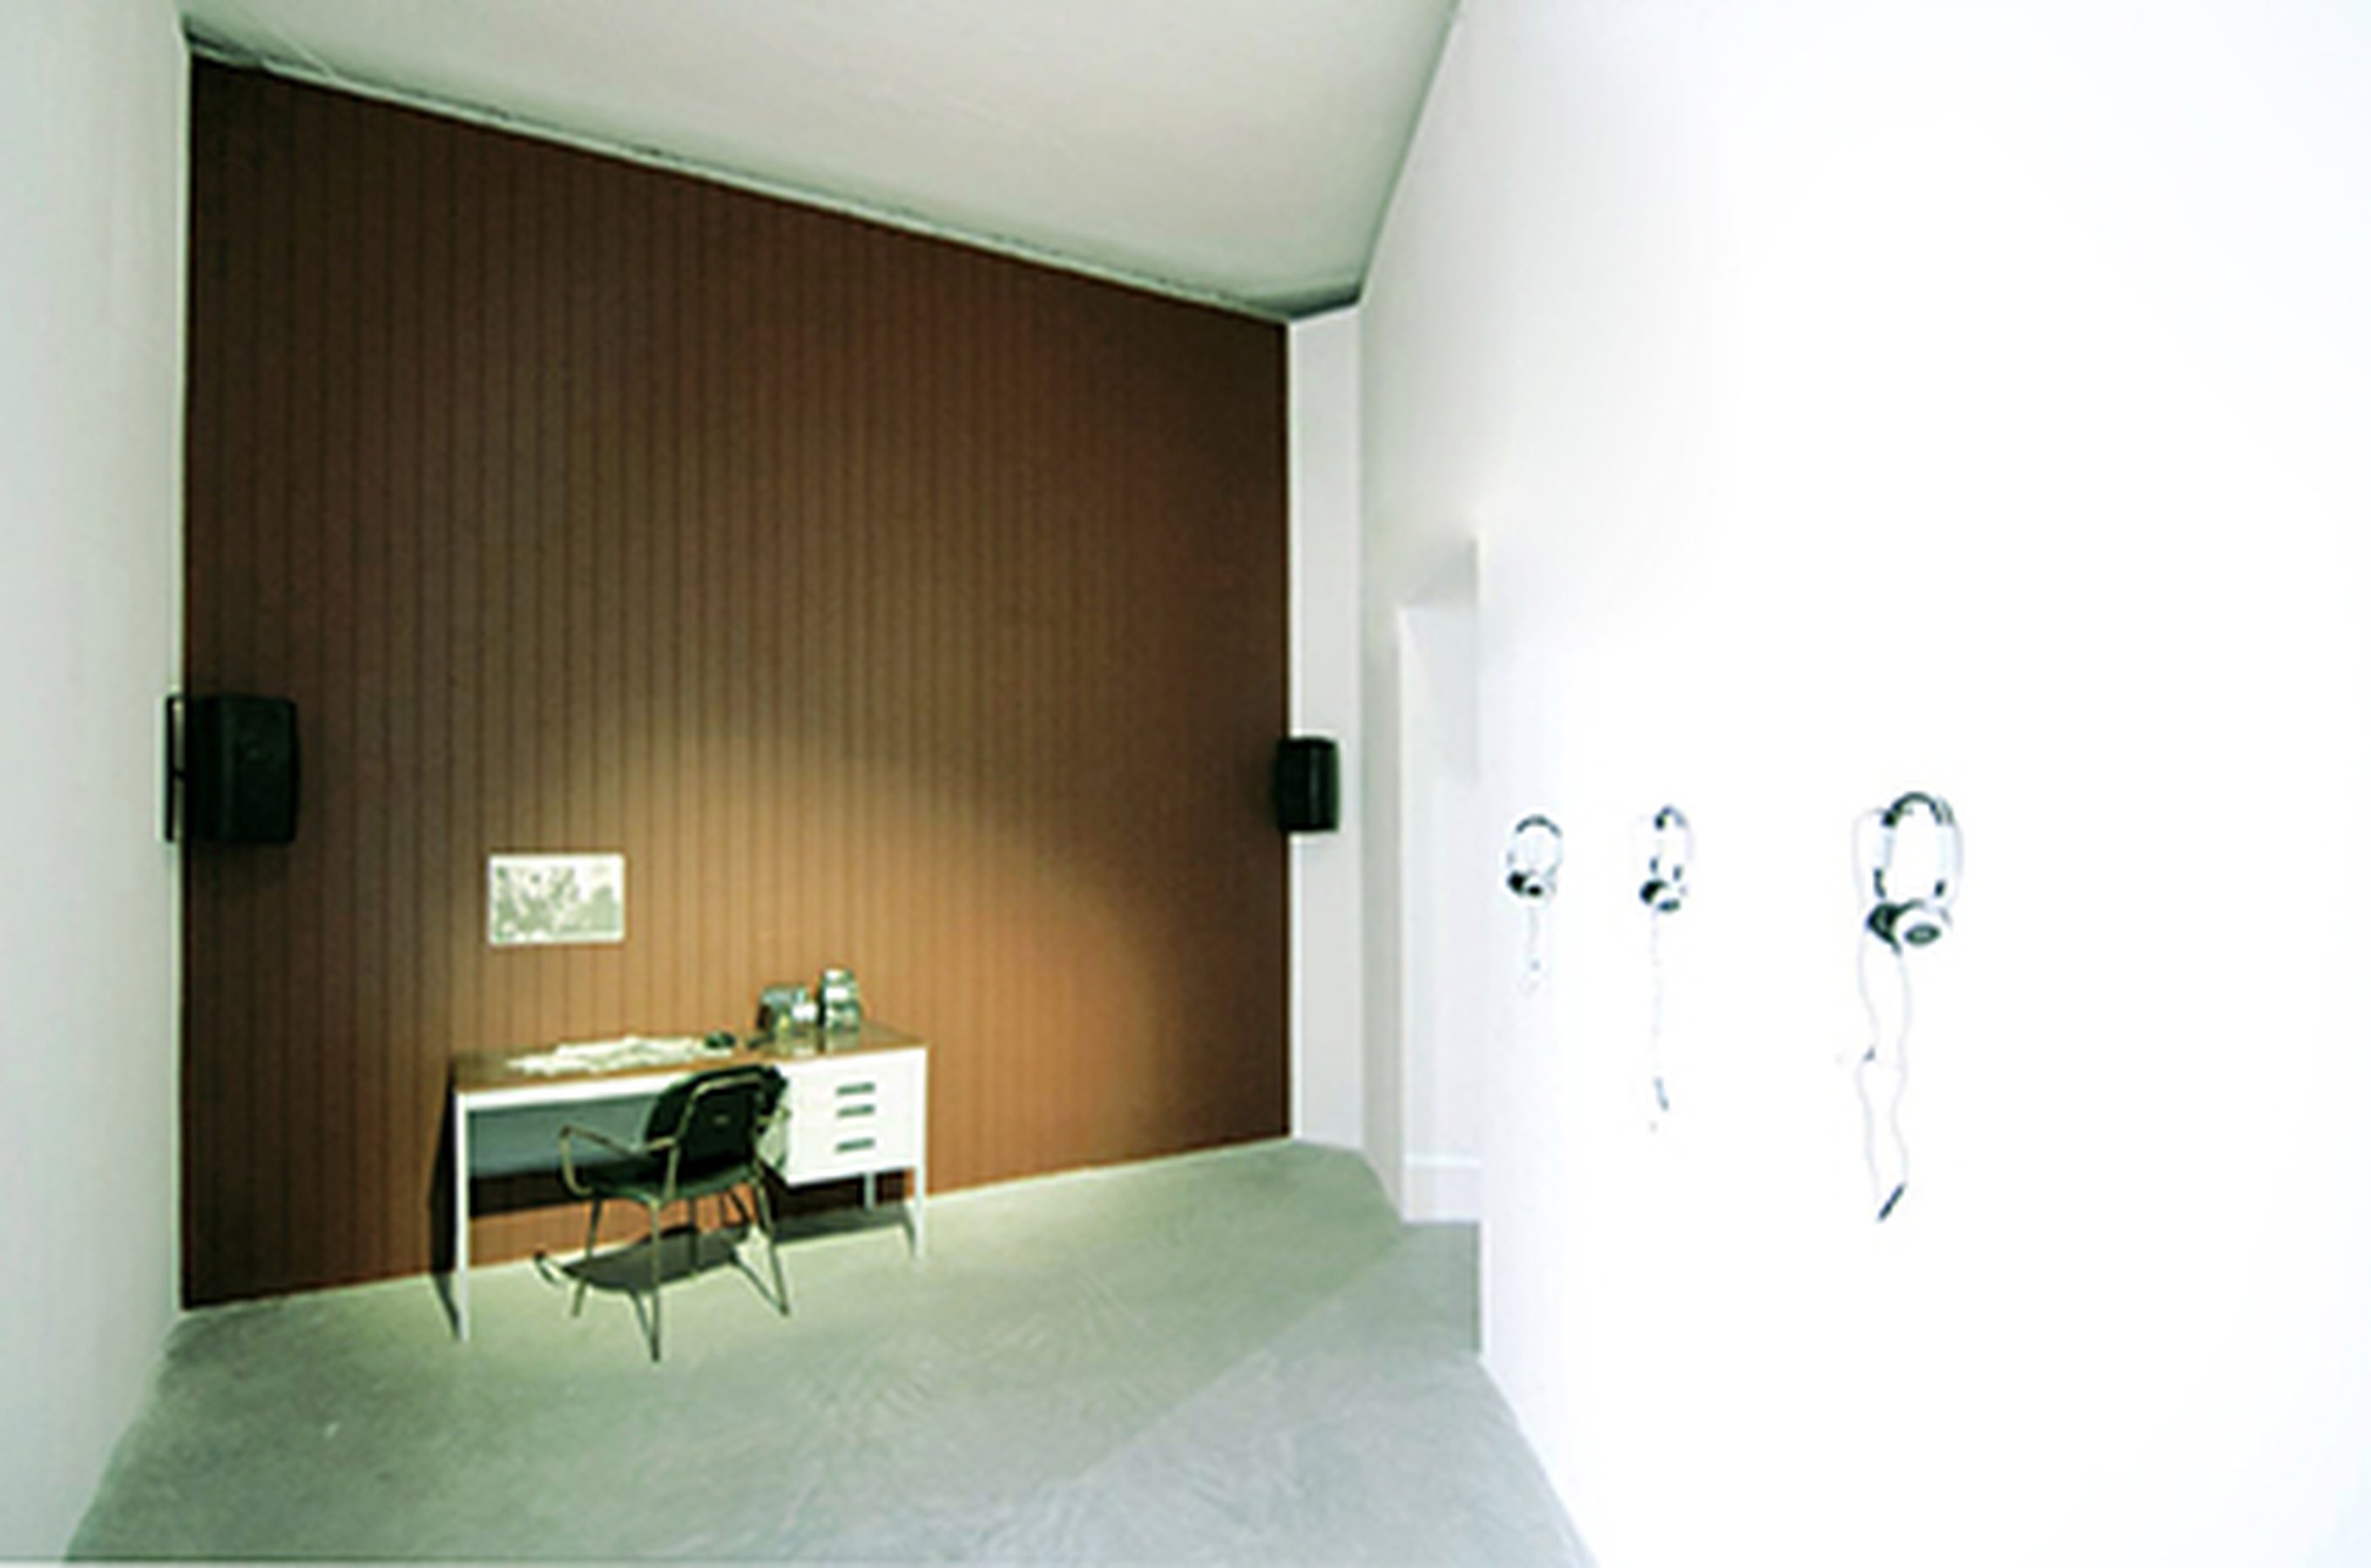 Estman Radio Drama, 2011 Installation: painted wood wall, desk, chair, radio, 4 CD players, 4 headphones Dimensions determinated by the space Installation view at 54th Biennial of Venice, ILLUMINATIONS, Venice (IT)